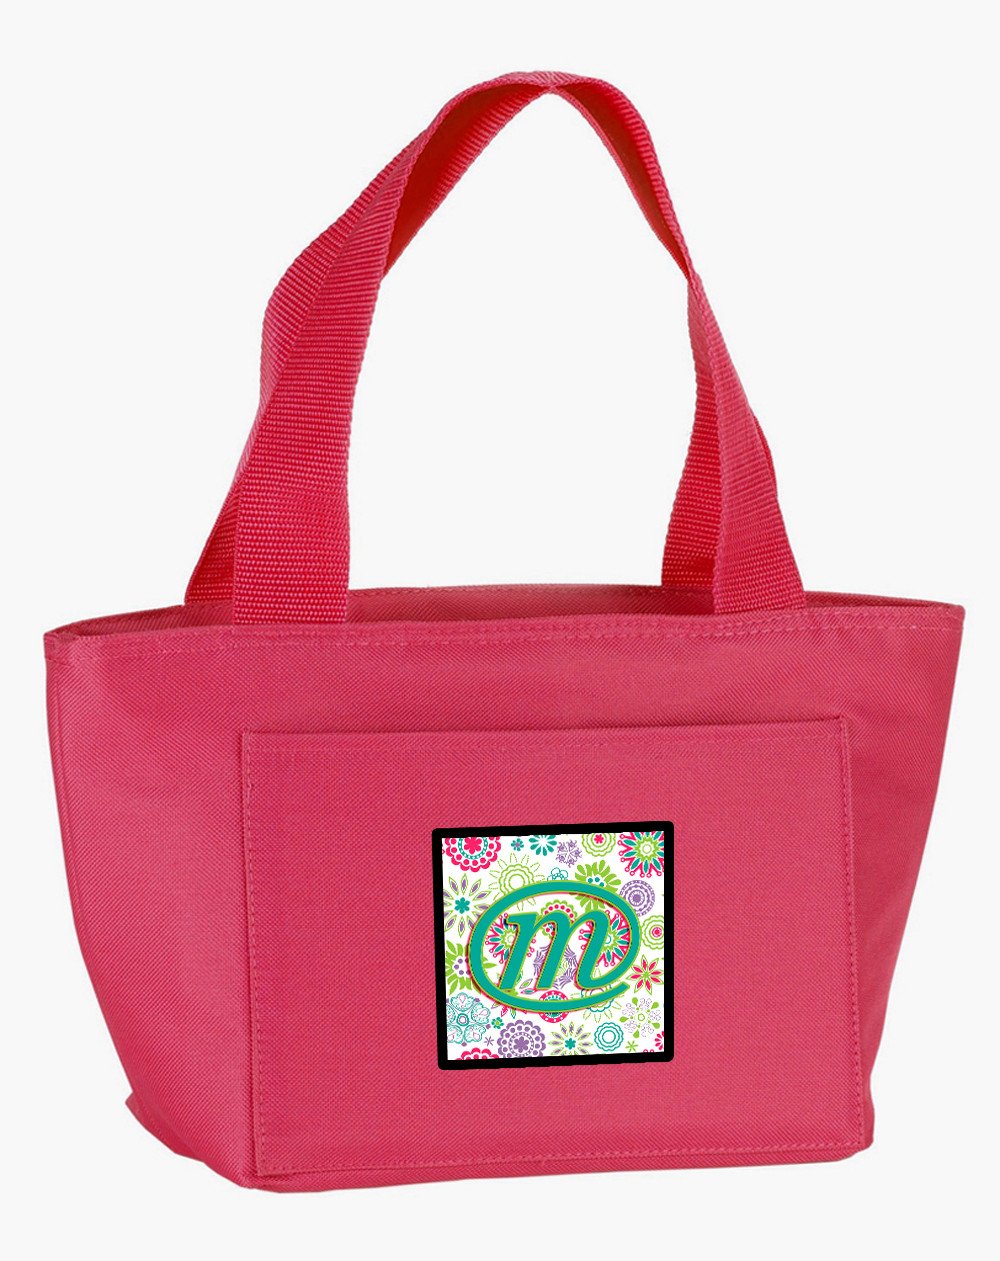 Letter M Flowers Pink Teal Green Initial Lunch Bag CJ2011-MPK-8808 by Caroline's Treasures